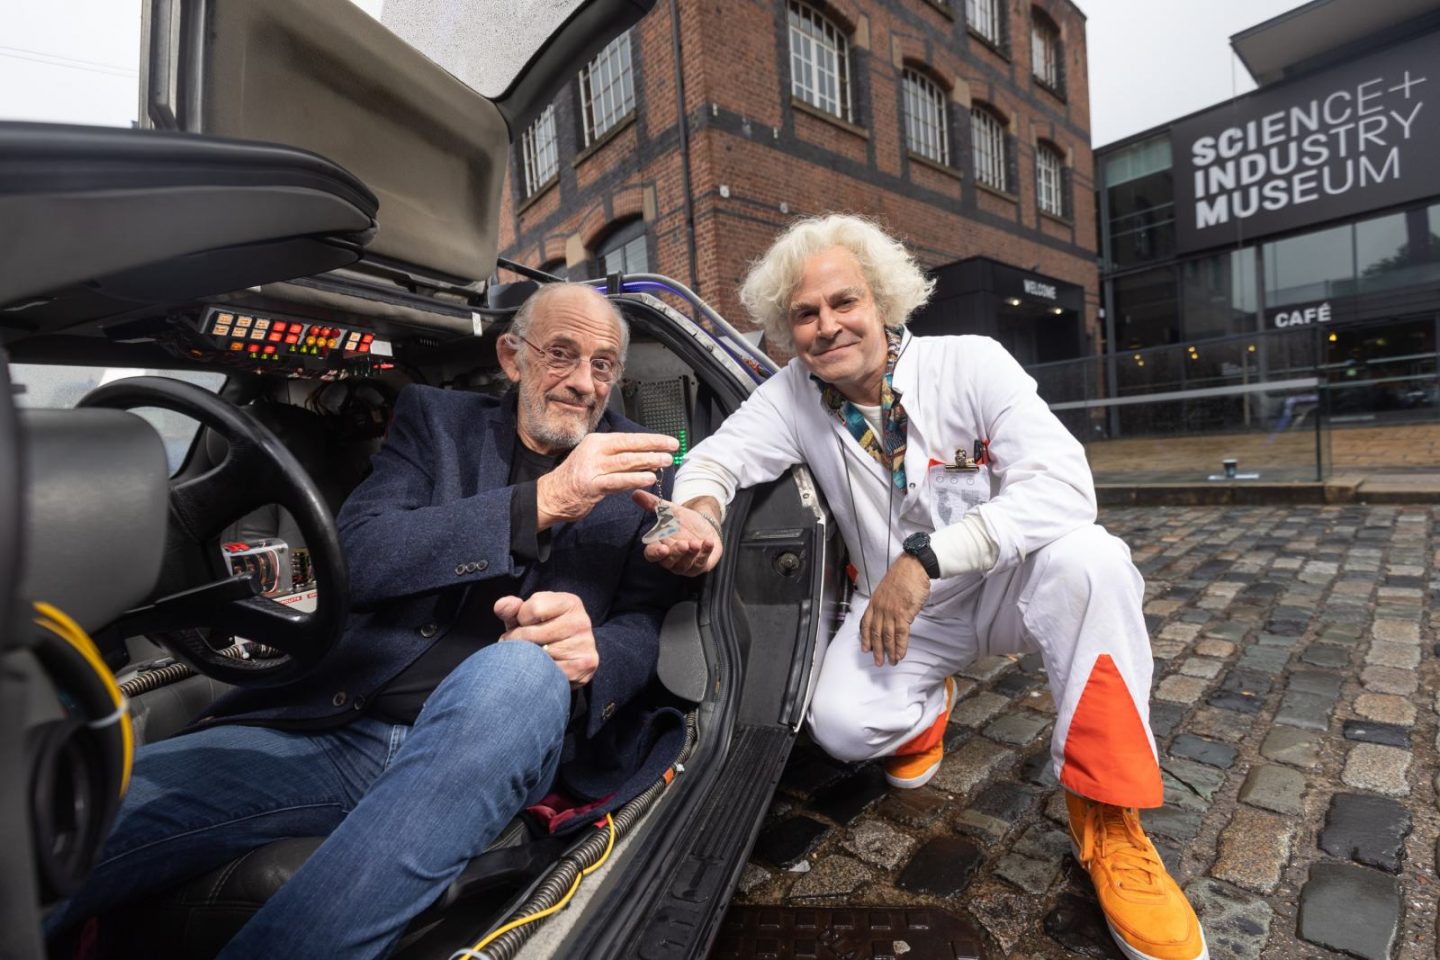 LtoR Christopher Lloyd & Roger Bart (Doc Brown) at the Manchester launch for Back to the Future the Musical, credit Phil Treagus